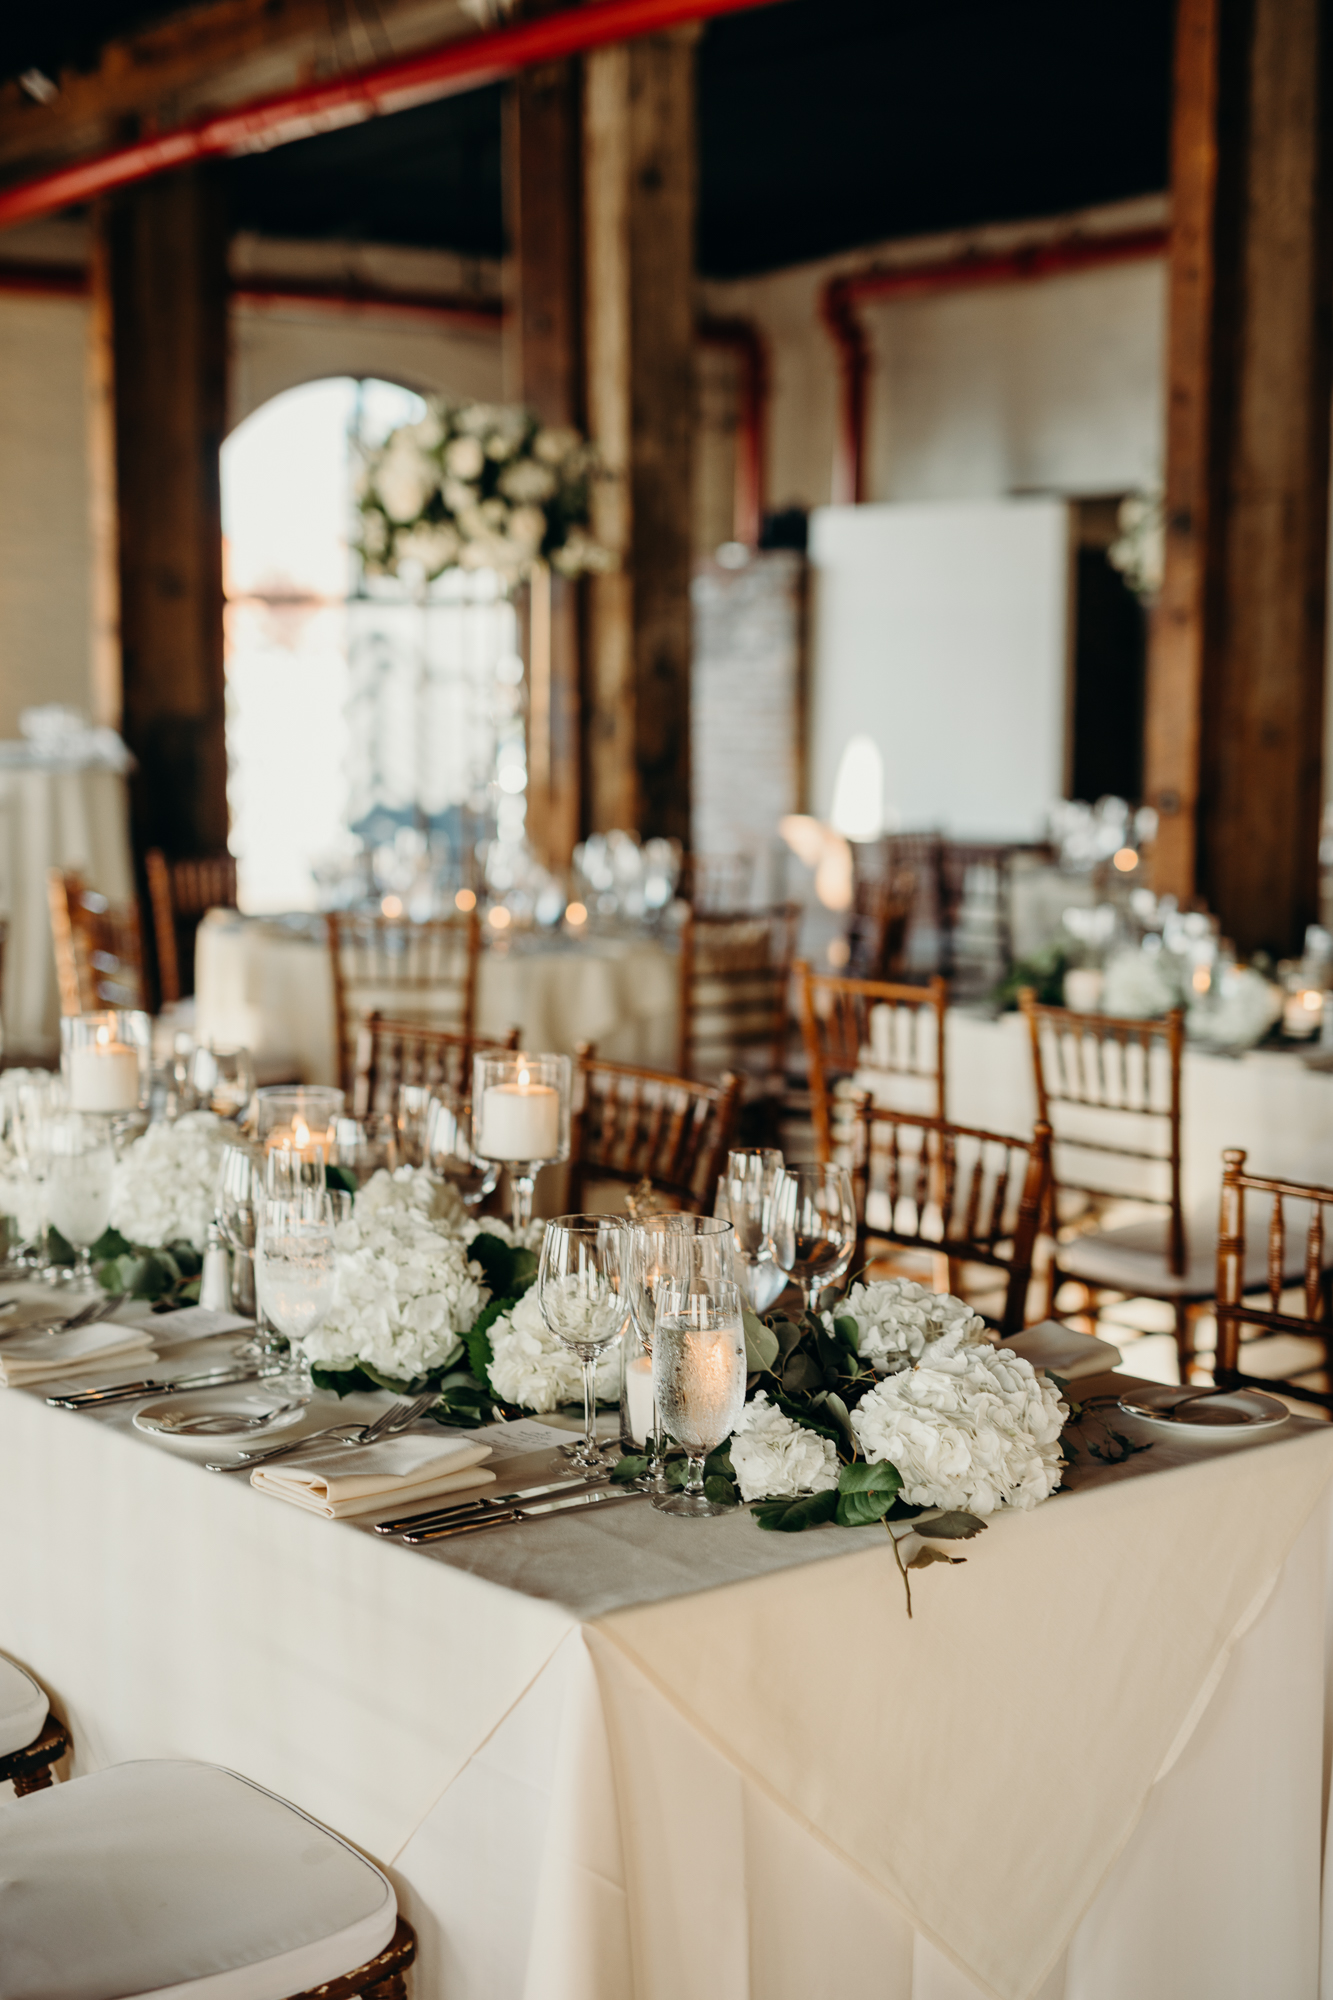 wedding reception details at liberty warehouse in brooklyn, new york city